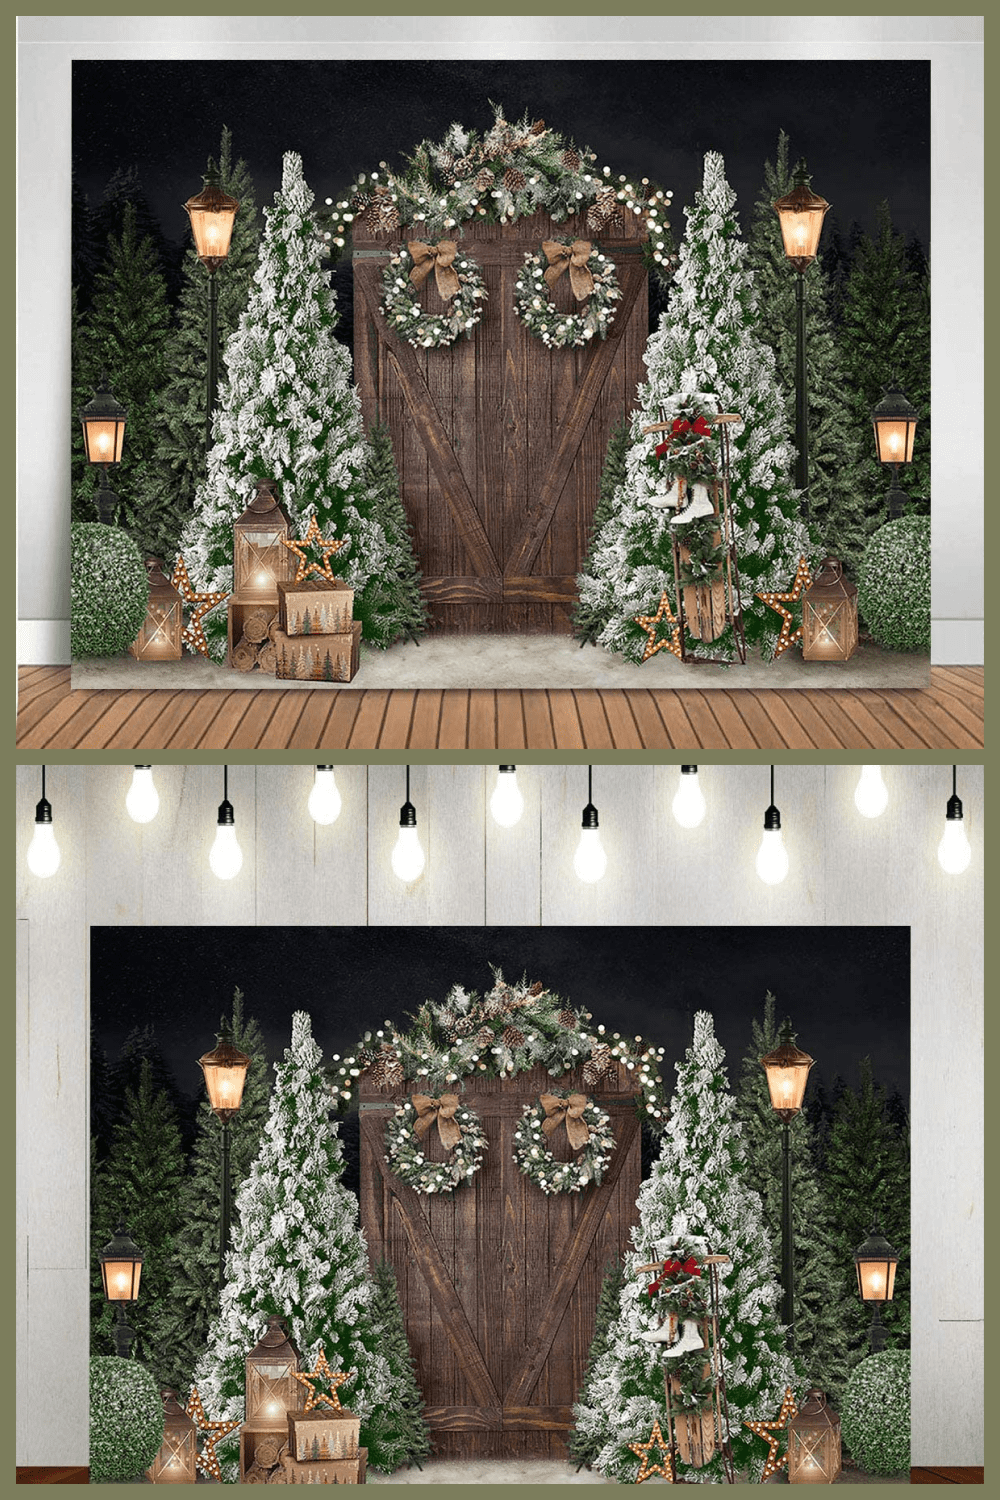 collage of two photos with wooden gates and snow-covered Christmas trees.